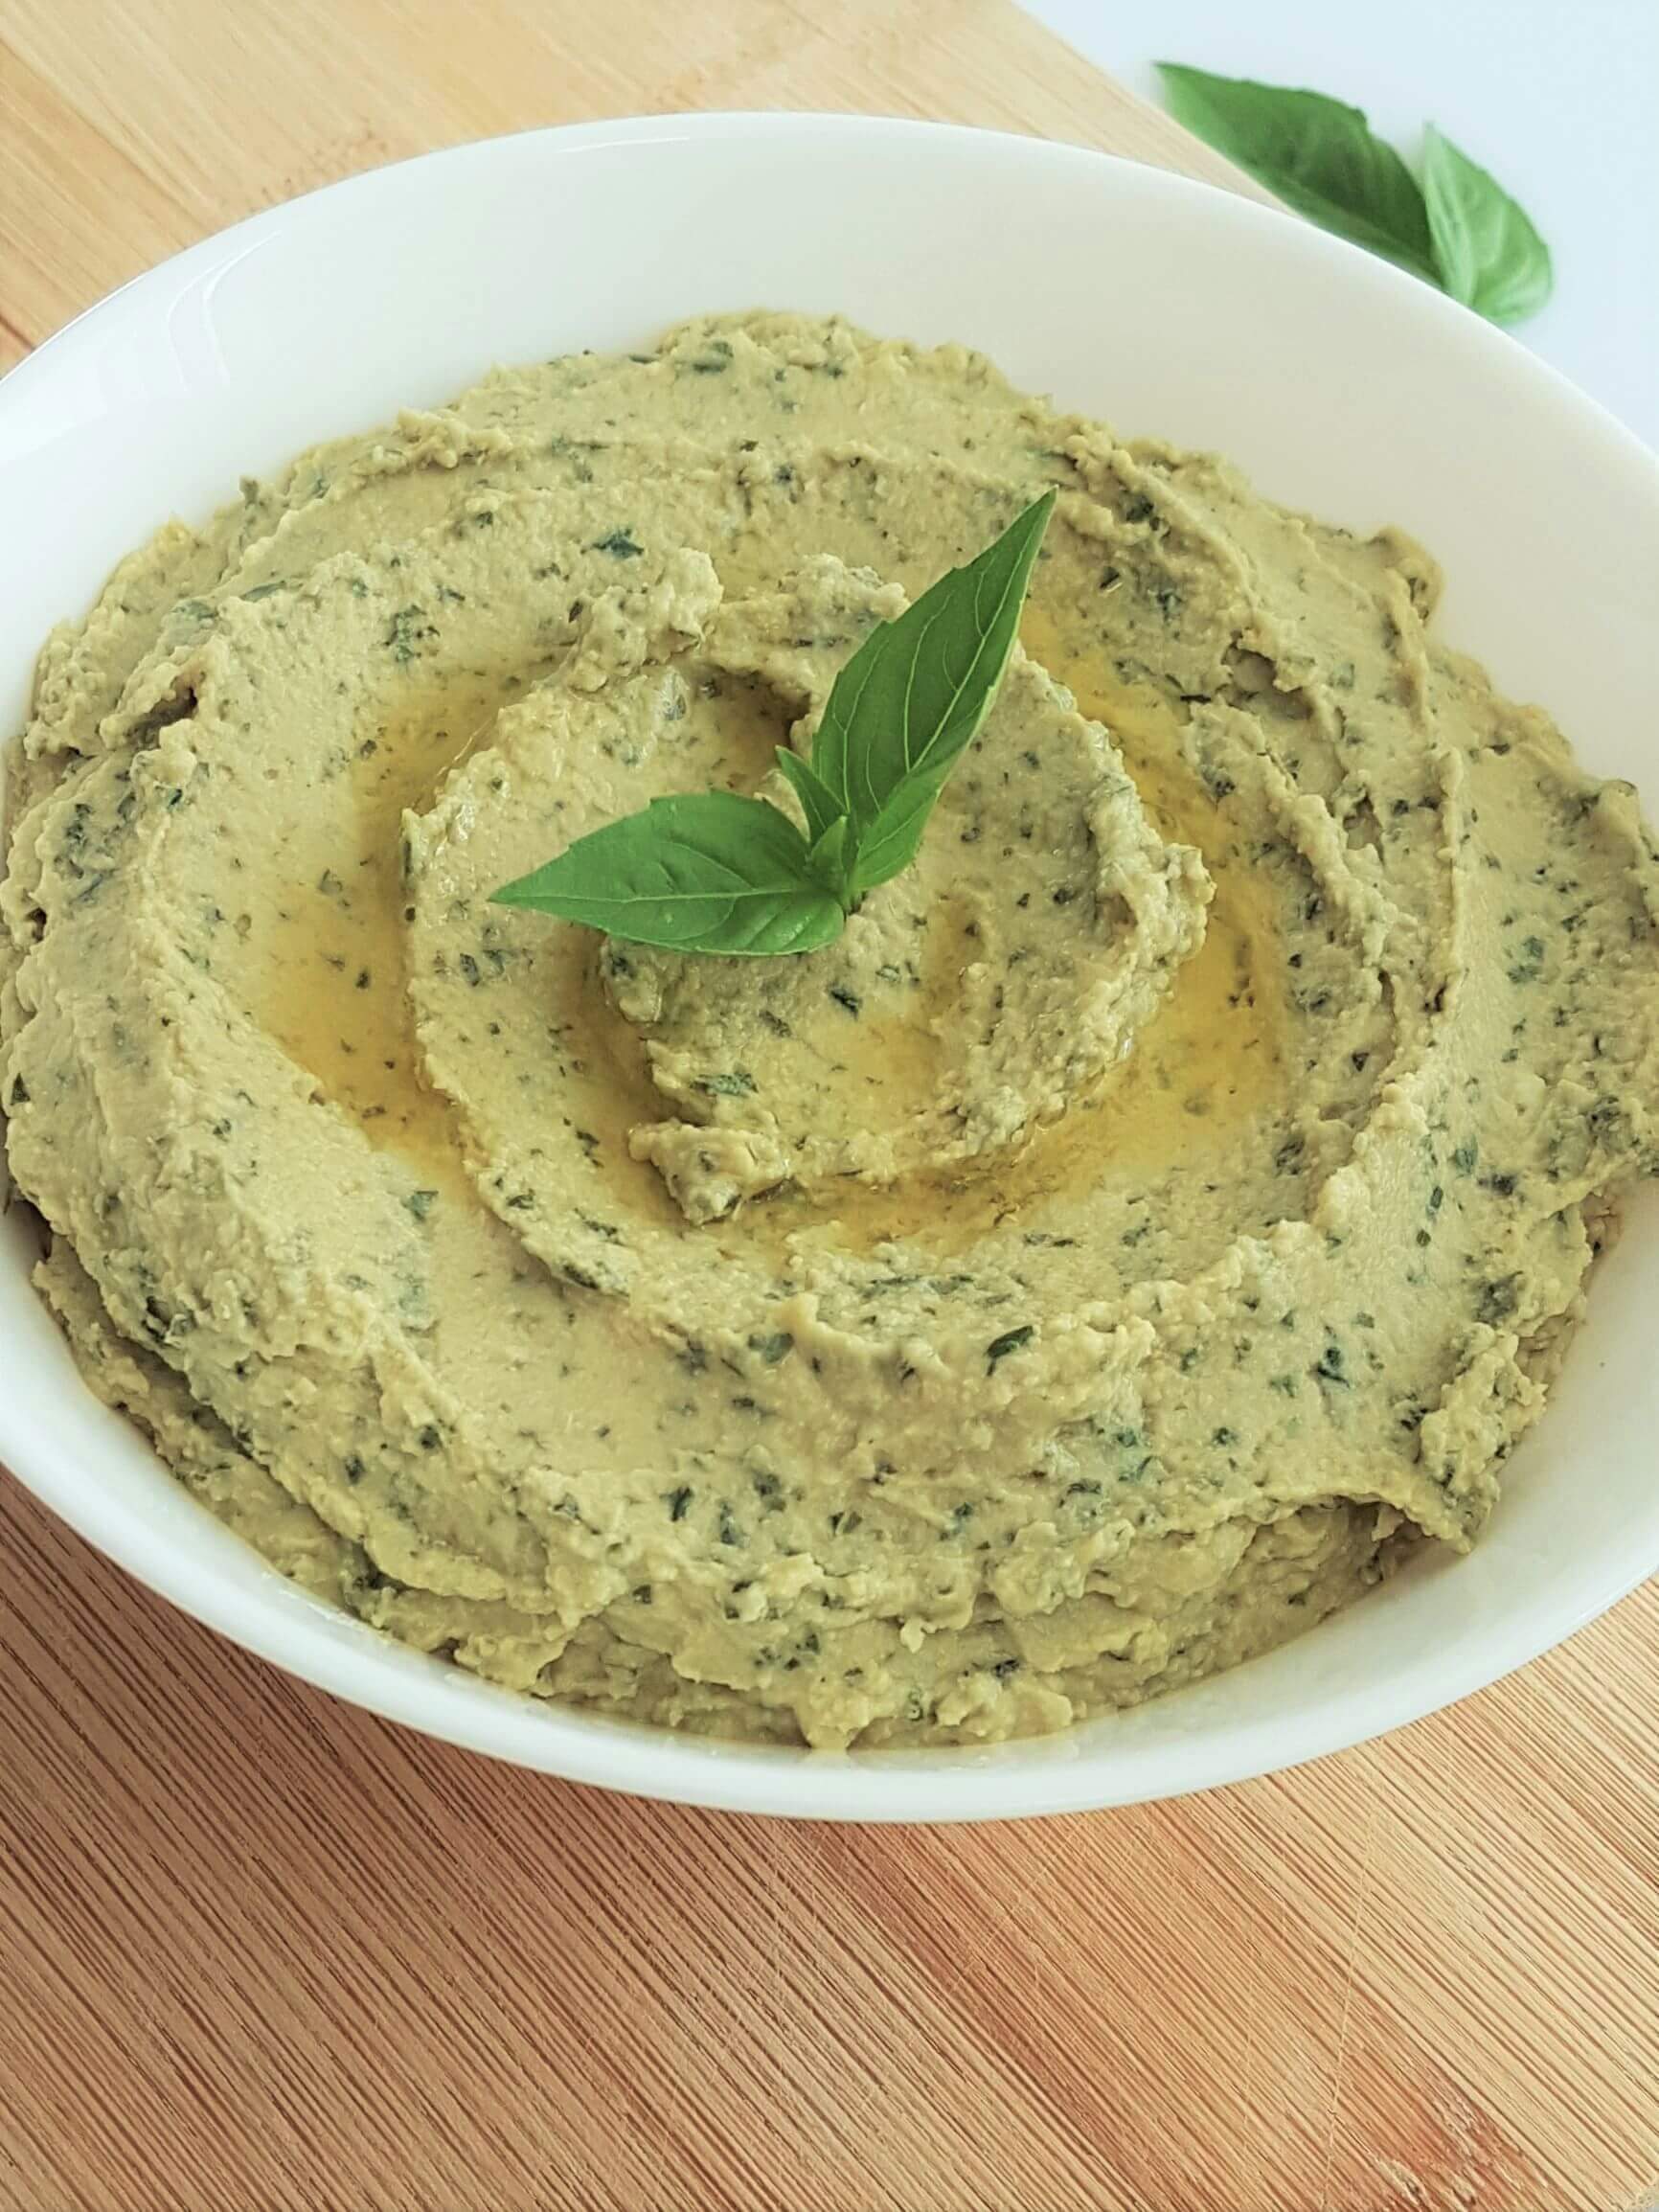 A plate of green basil hummus garnished with a pick of basil leaves in the center and drizzled with olive oil